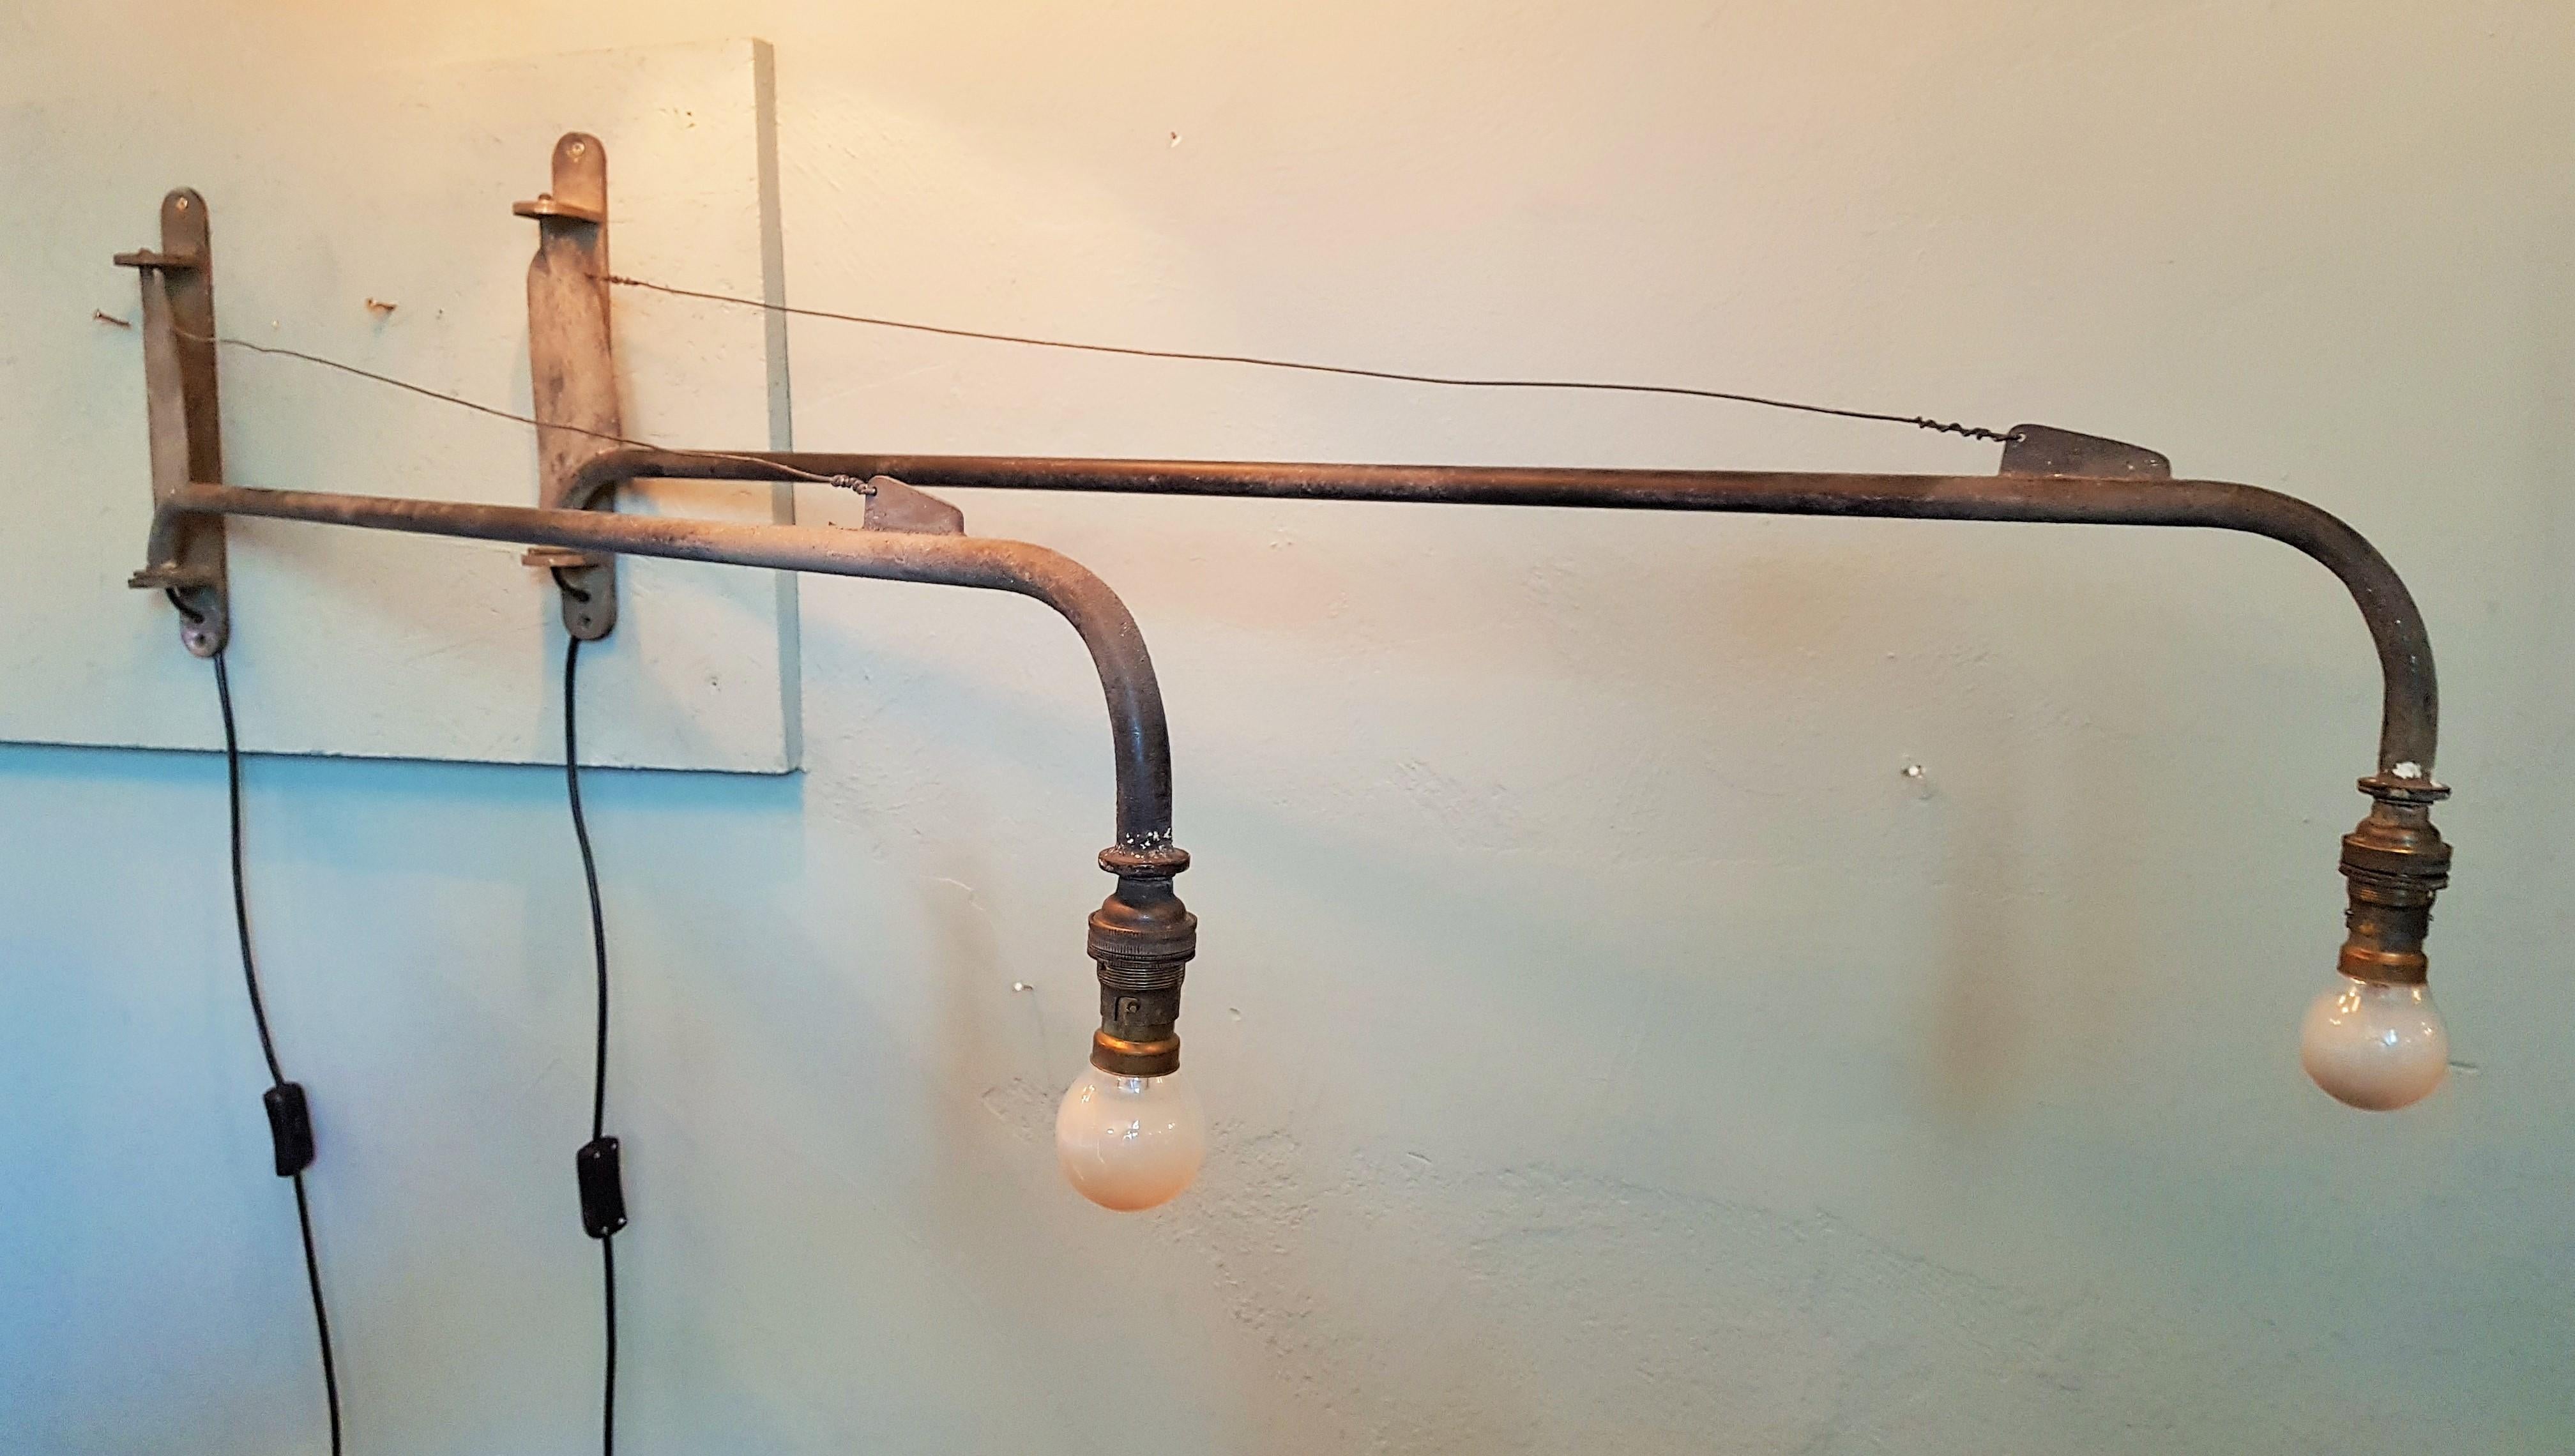 Midcentury Pair of Potence Swing Jib Wall Lamps, France, 1950s
Design by jean Prouve 1947.
Of the Period with nice Patina.
Rewired.